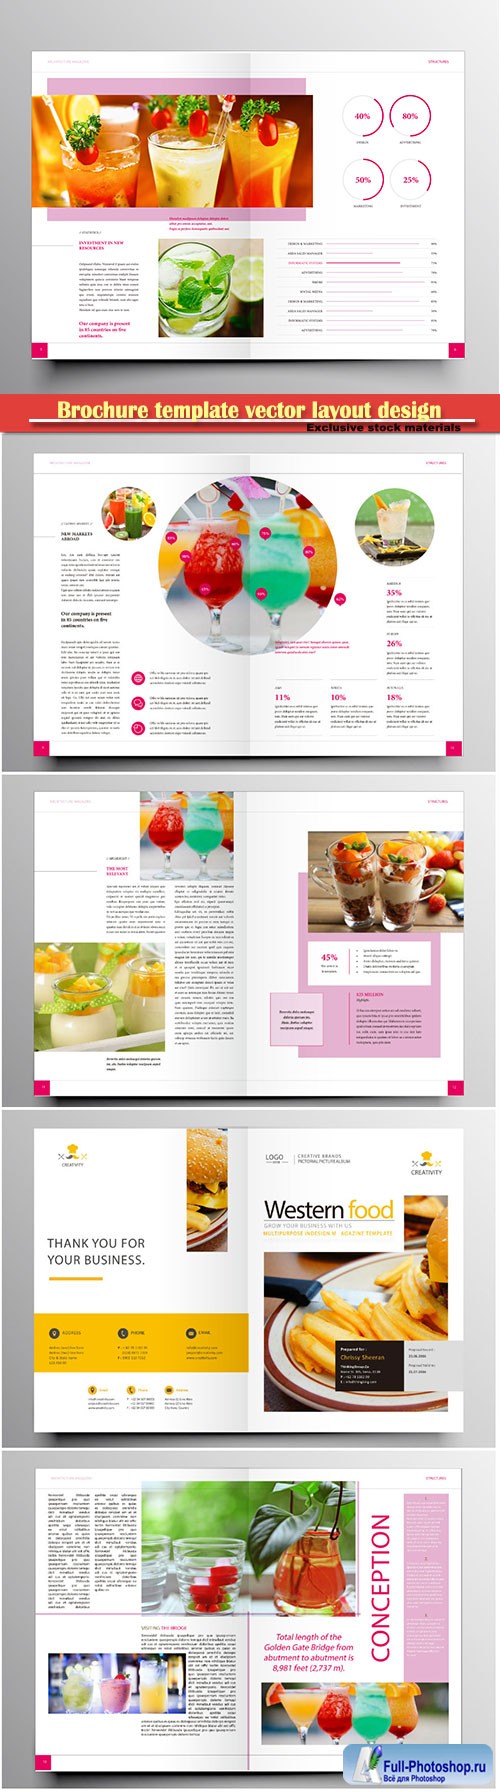 Brochure template vector layout design, corporate business annual report, magazine, flyer mockup # 183